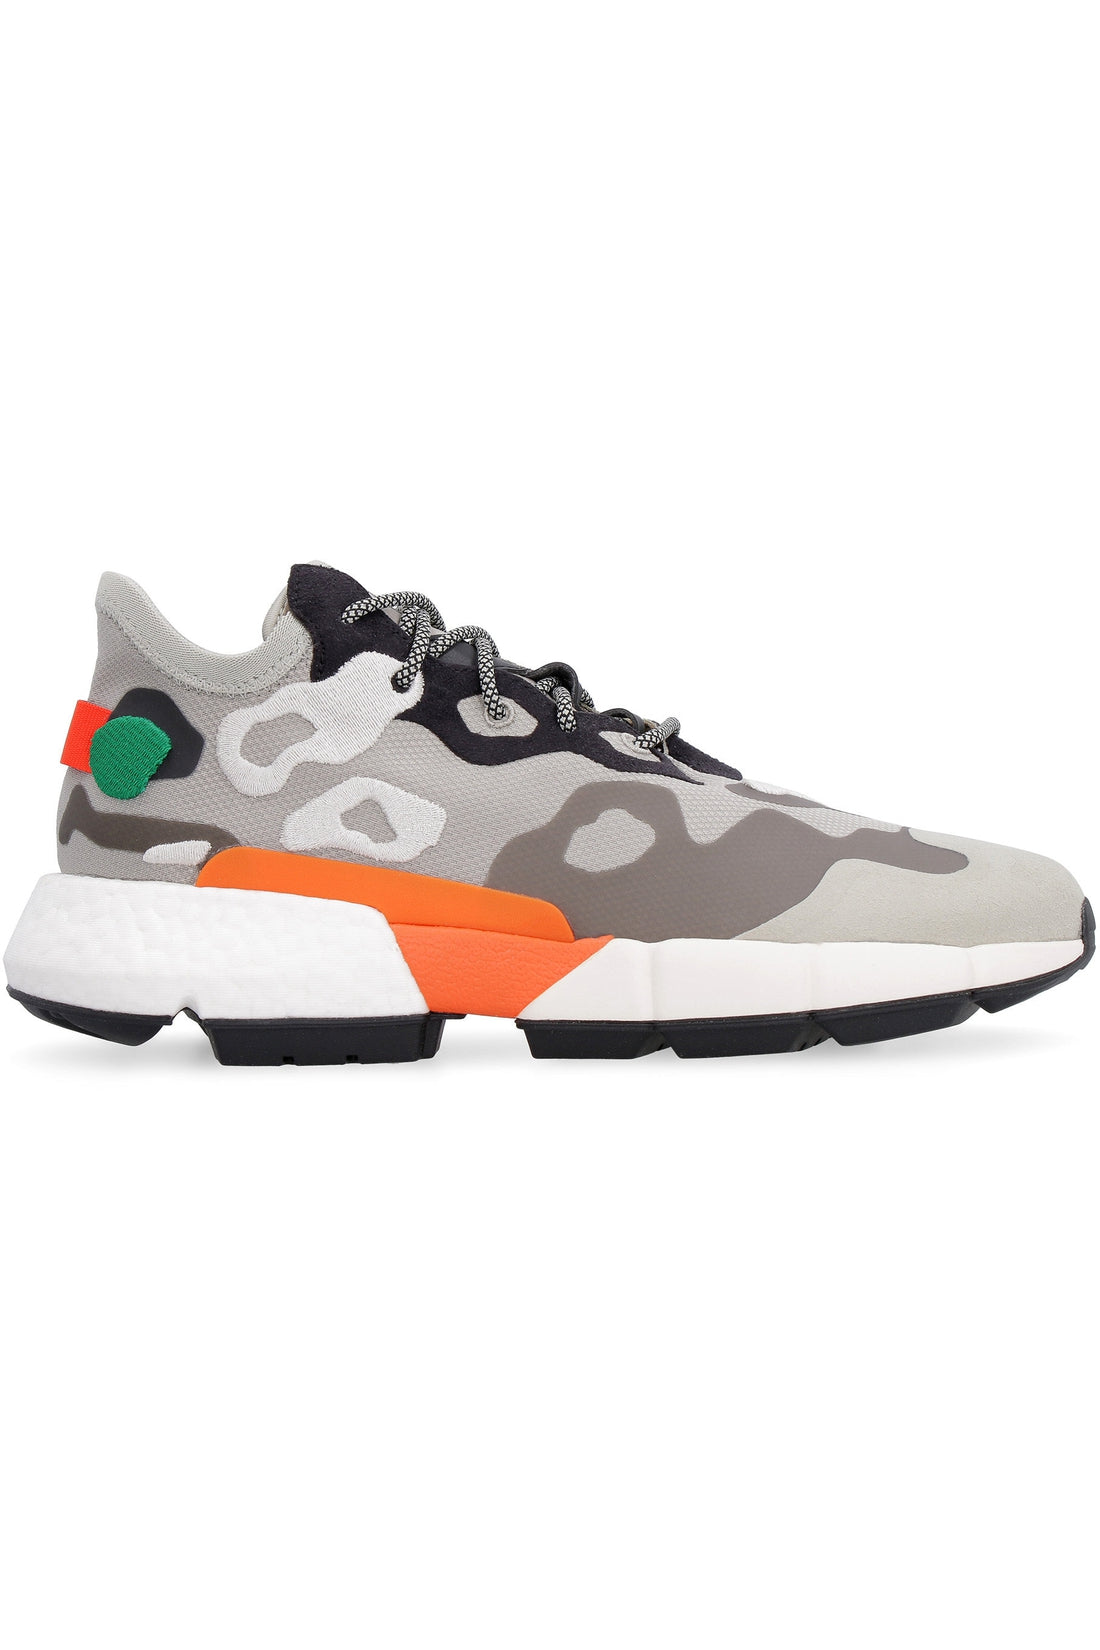 adidas-OUTLET-SALE-Pod-S3.2 low-top sneakers-ARCHIVIST